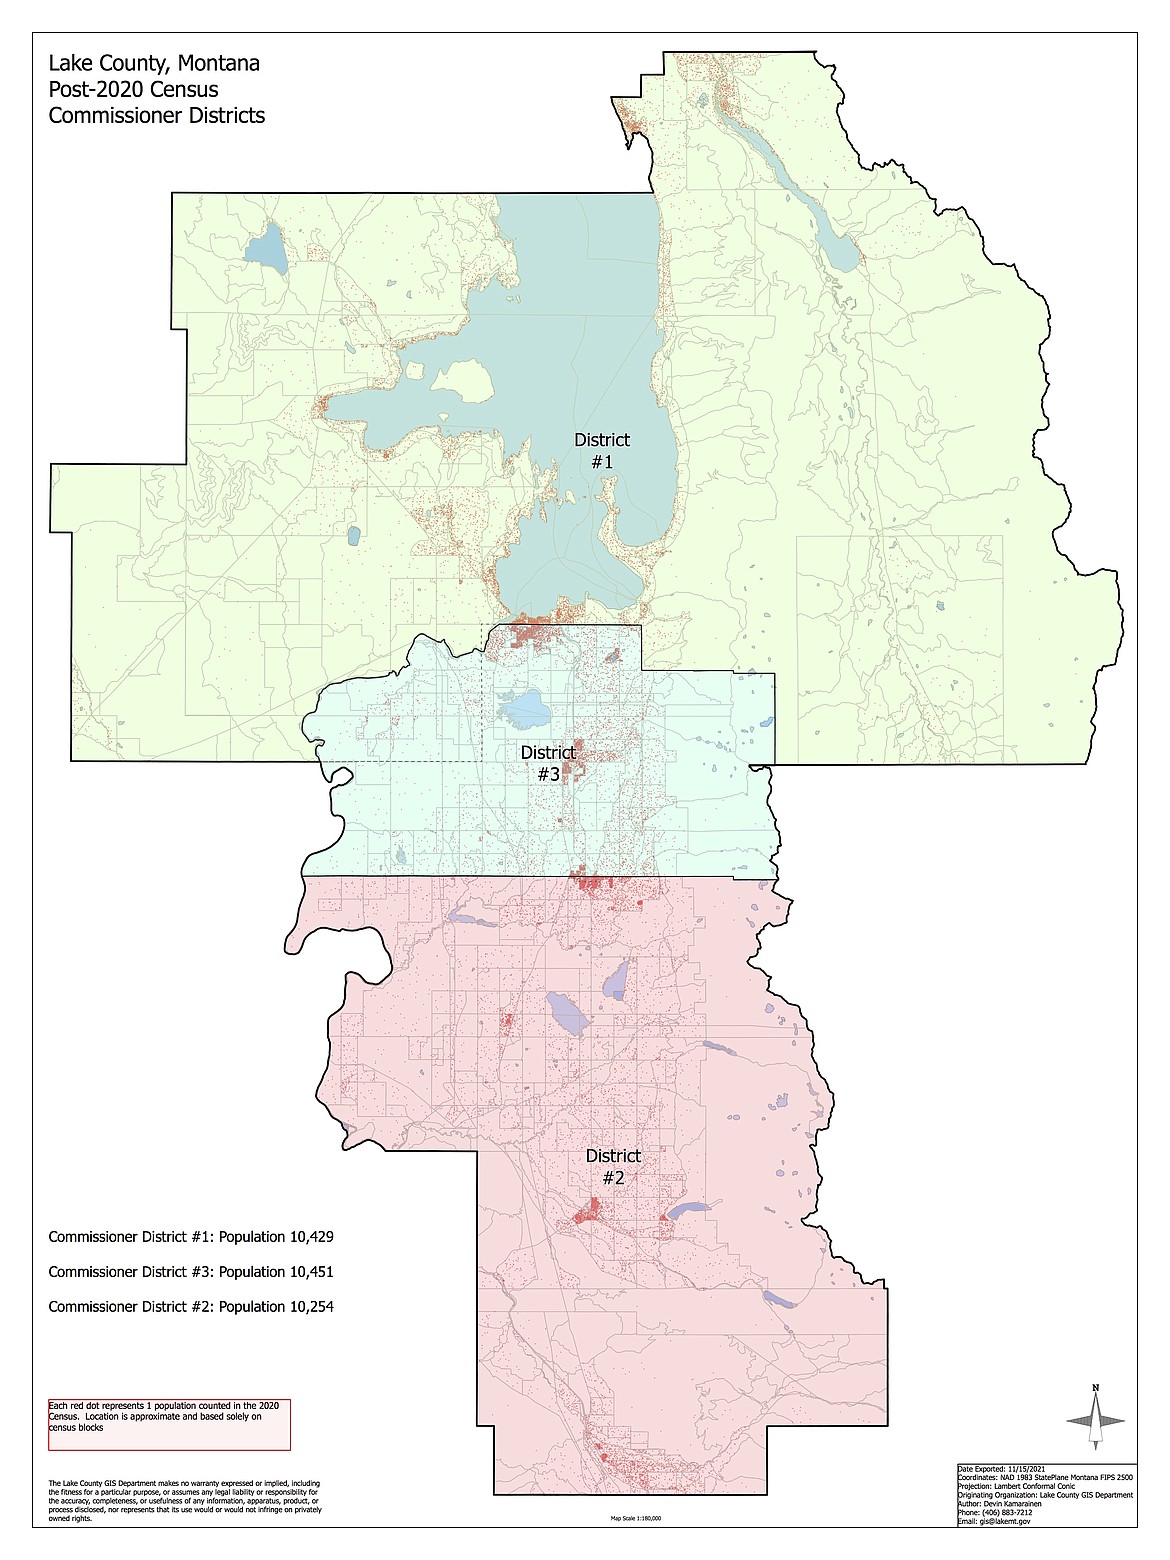 Lake County Commission District Map (courtesy of Lake County GIS Department)